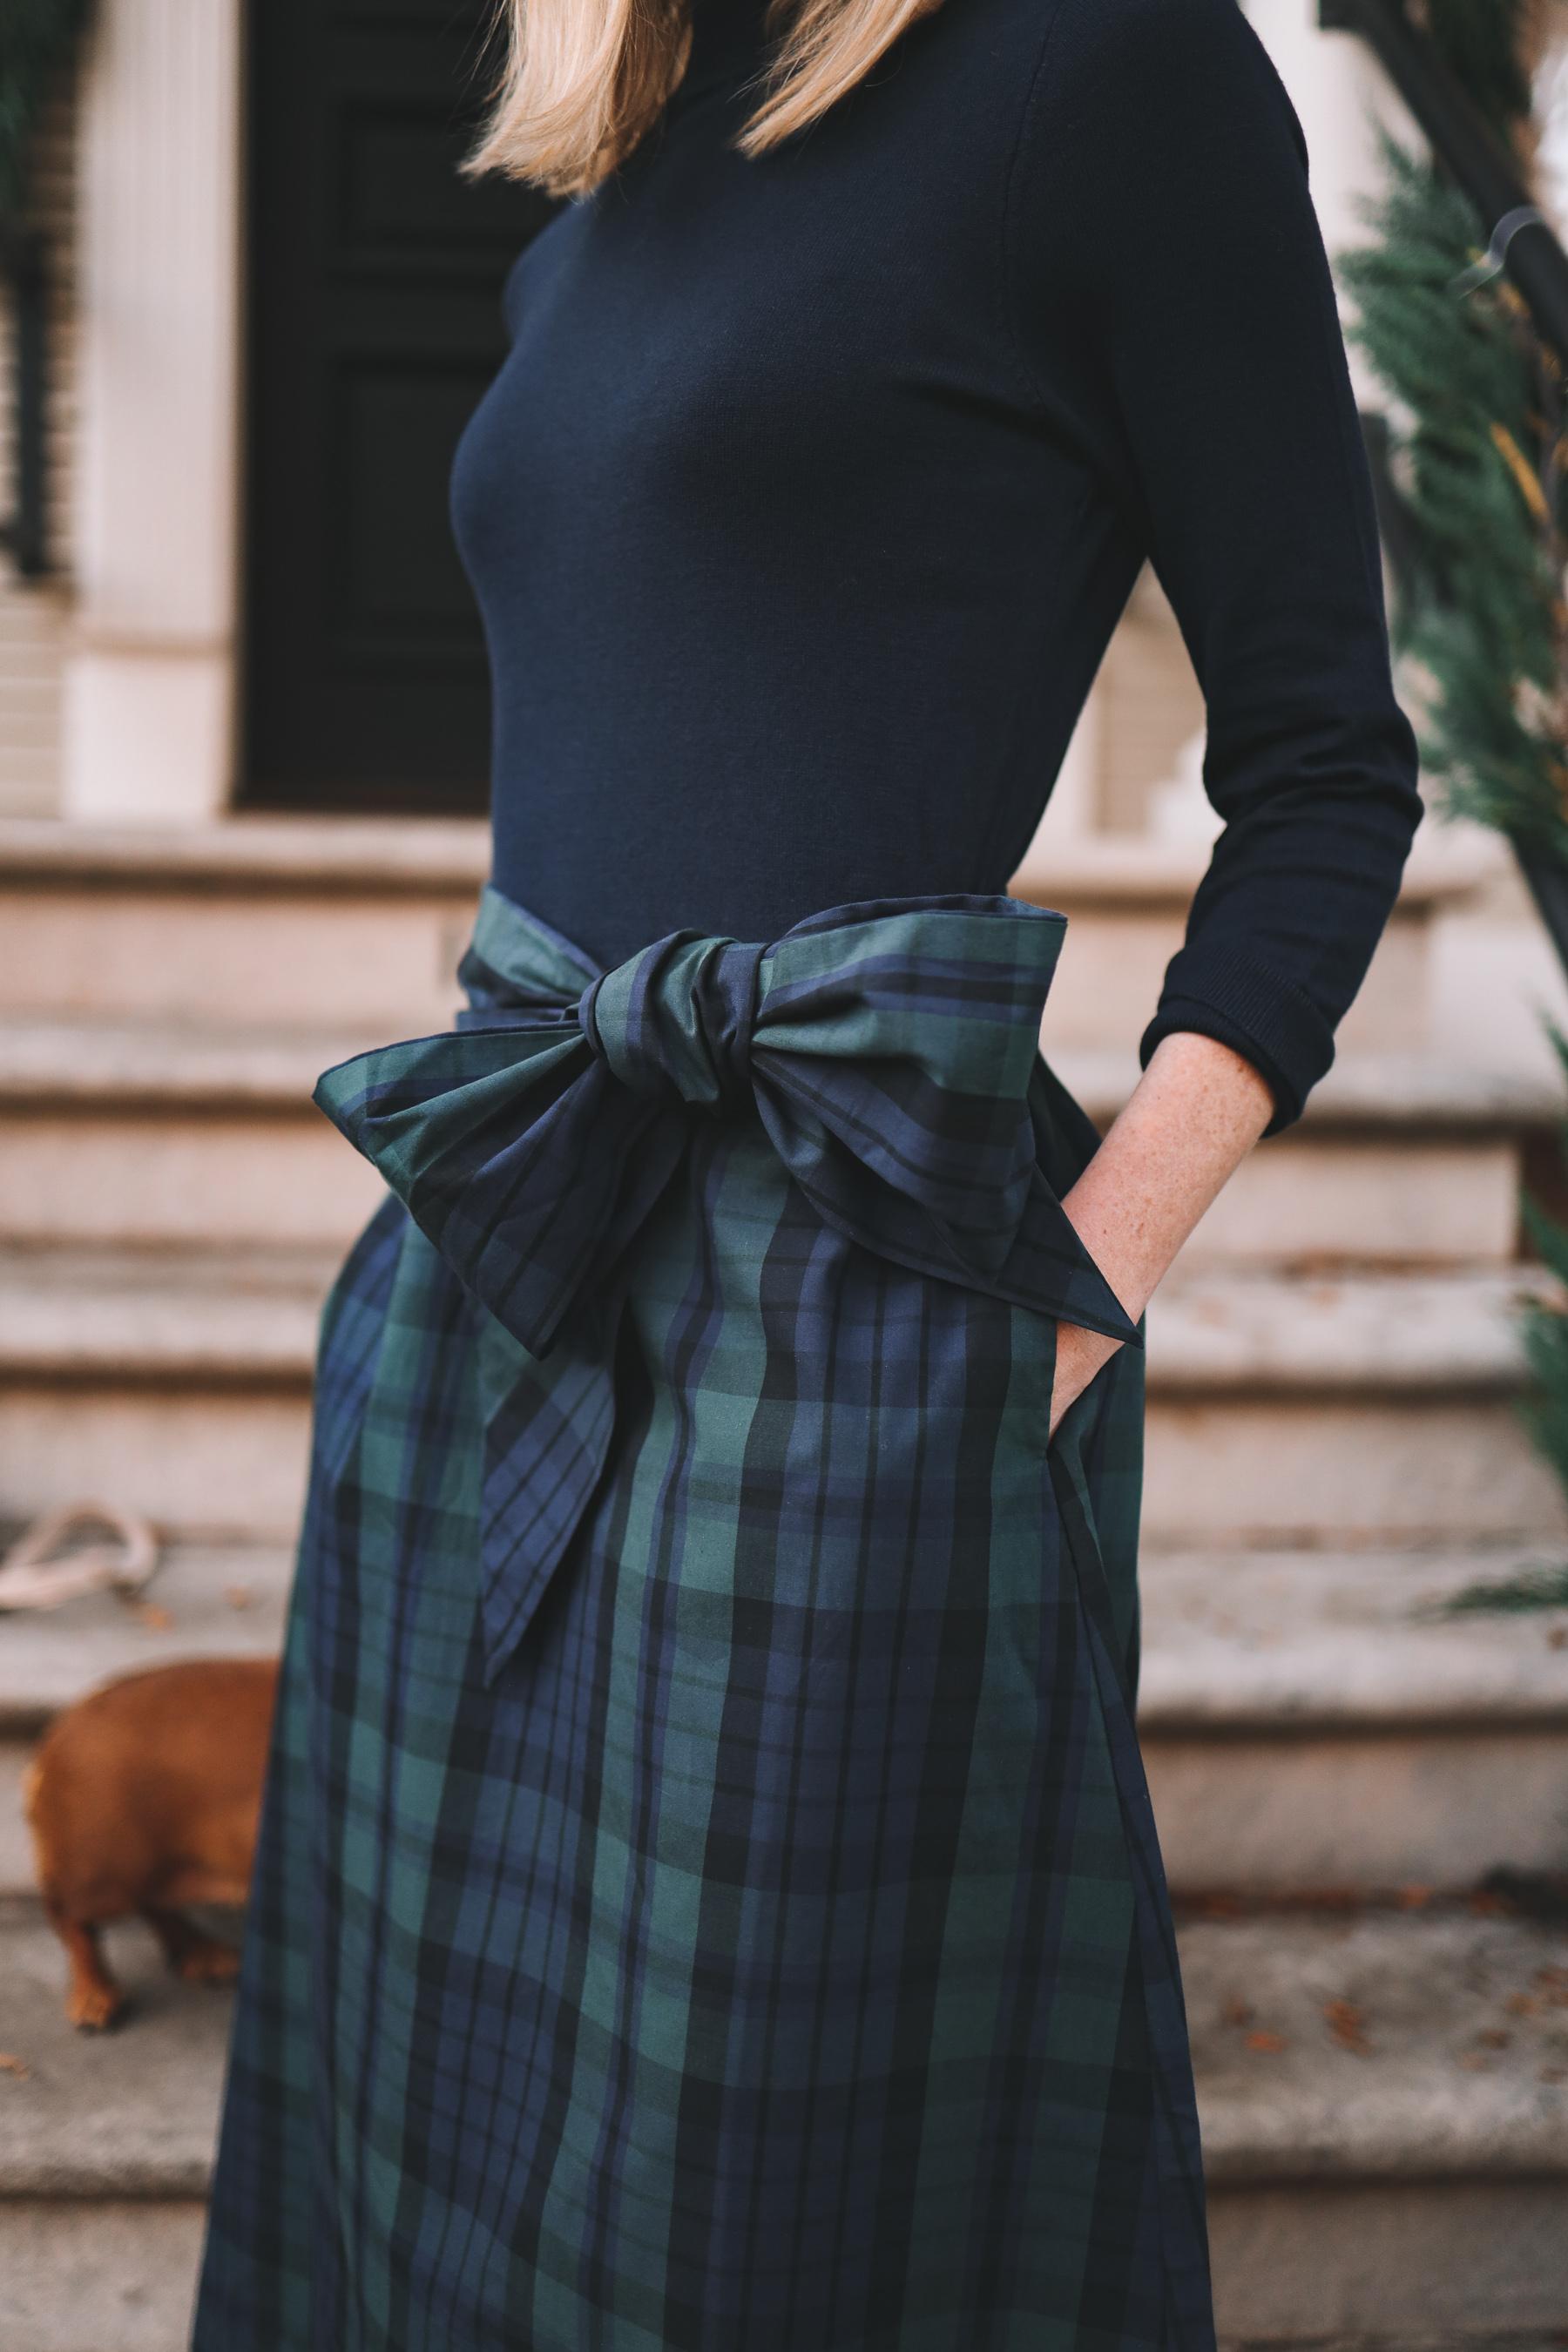 Bows on Bows holiday outfit